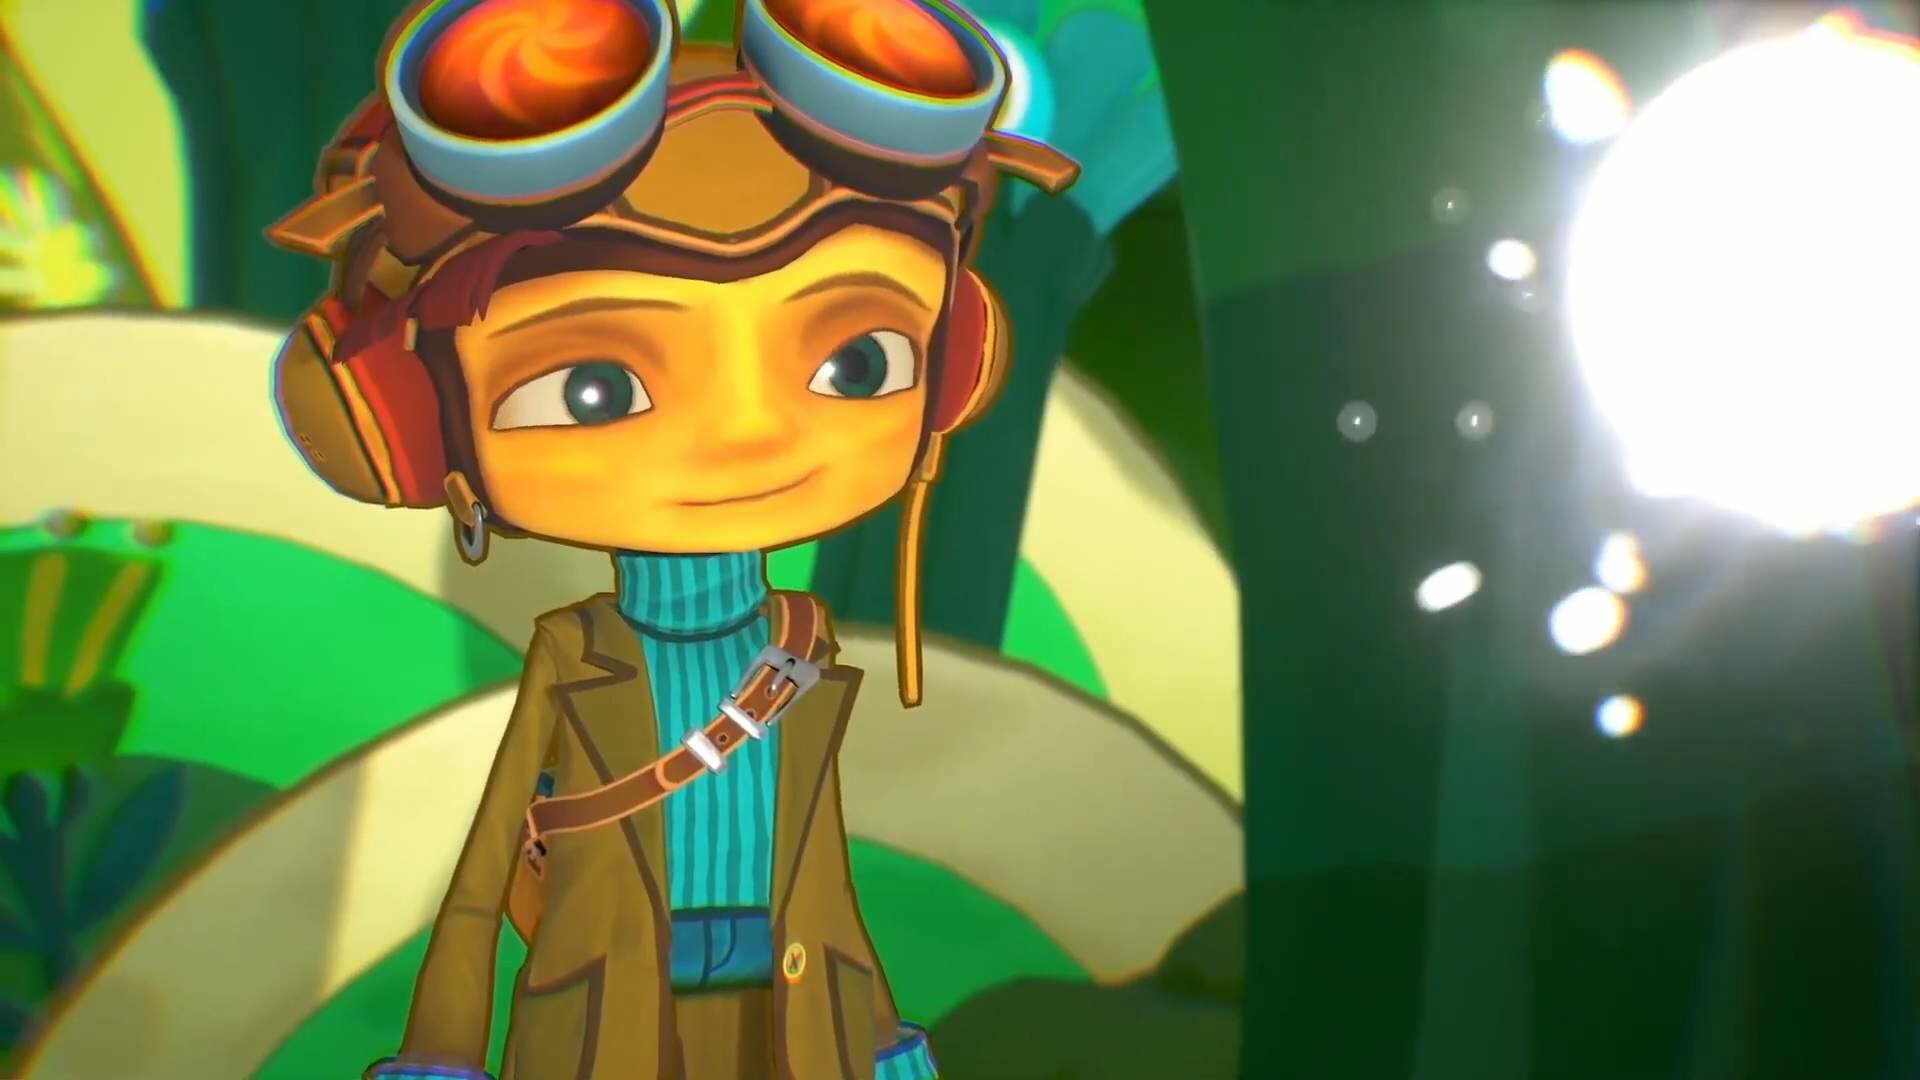 Psychonauts 2: A young acrobat that is training to become a Psychonaut, Raz. 1920x1080 Full HD Wallpaper.